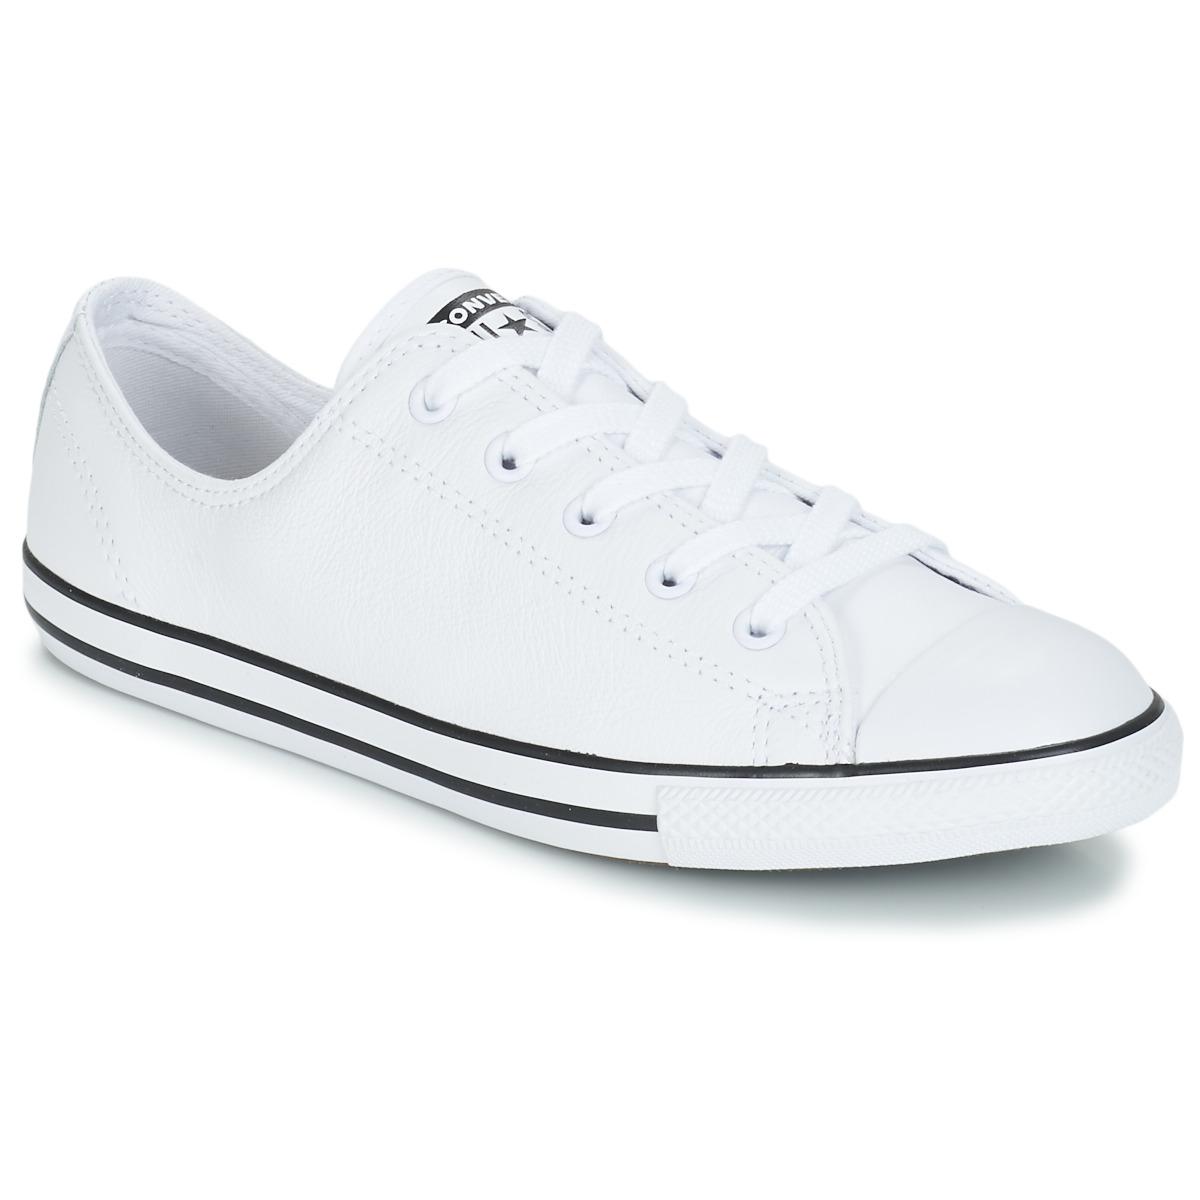 converse dainty ox white leather